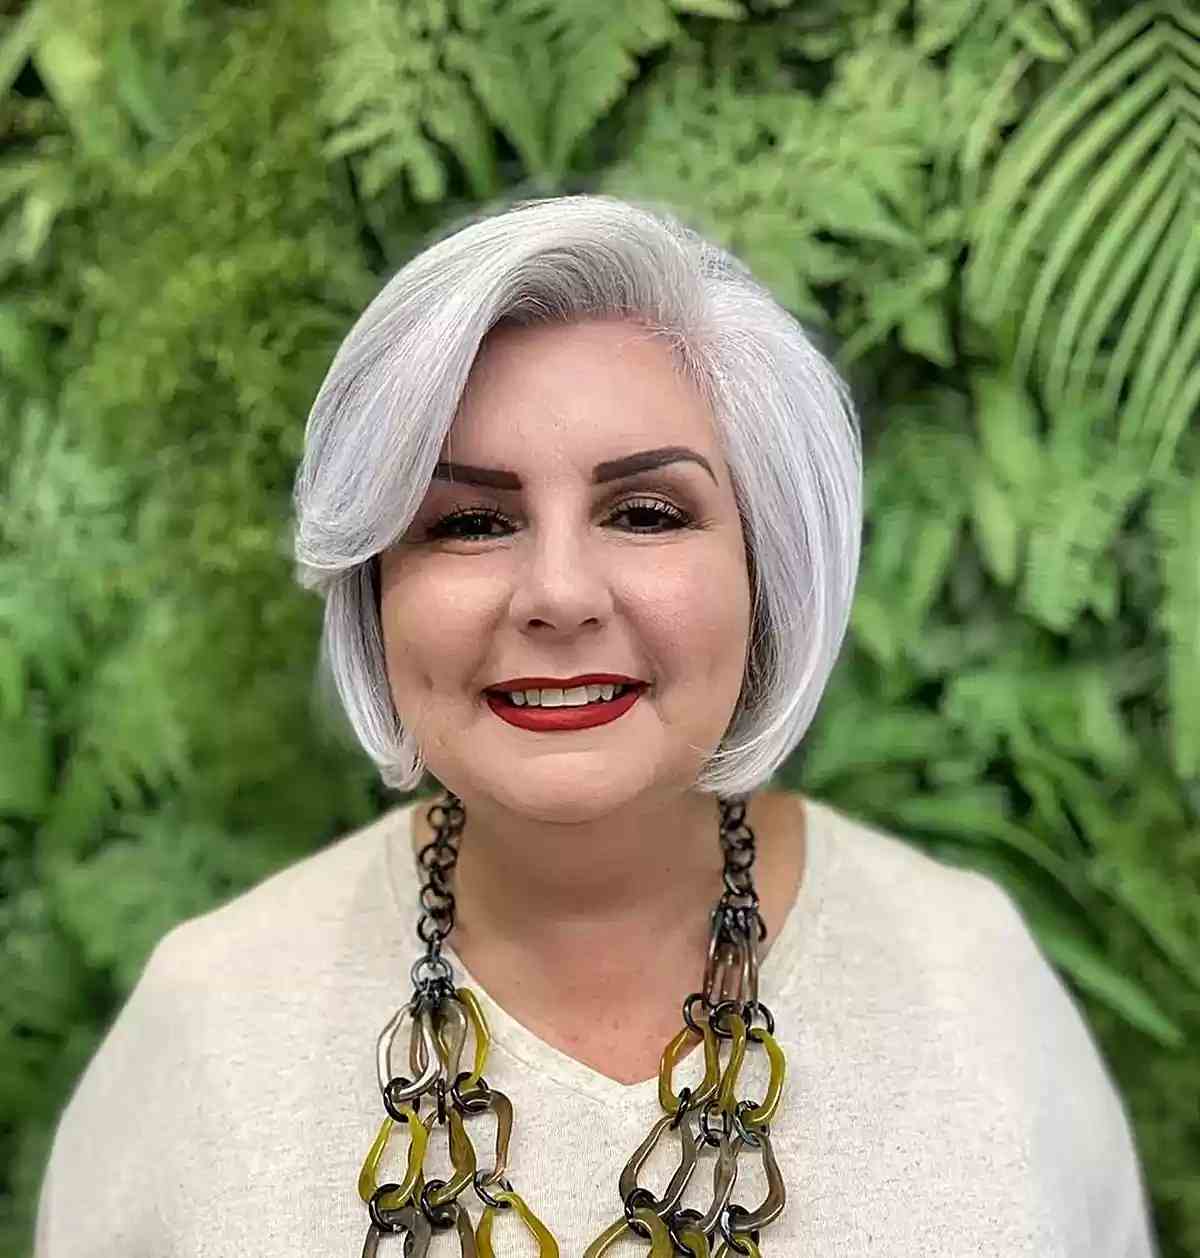 Gray Chin Bob with Side Bangs on Older Women Over 60 with Round Faces